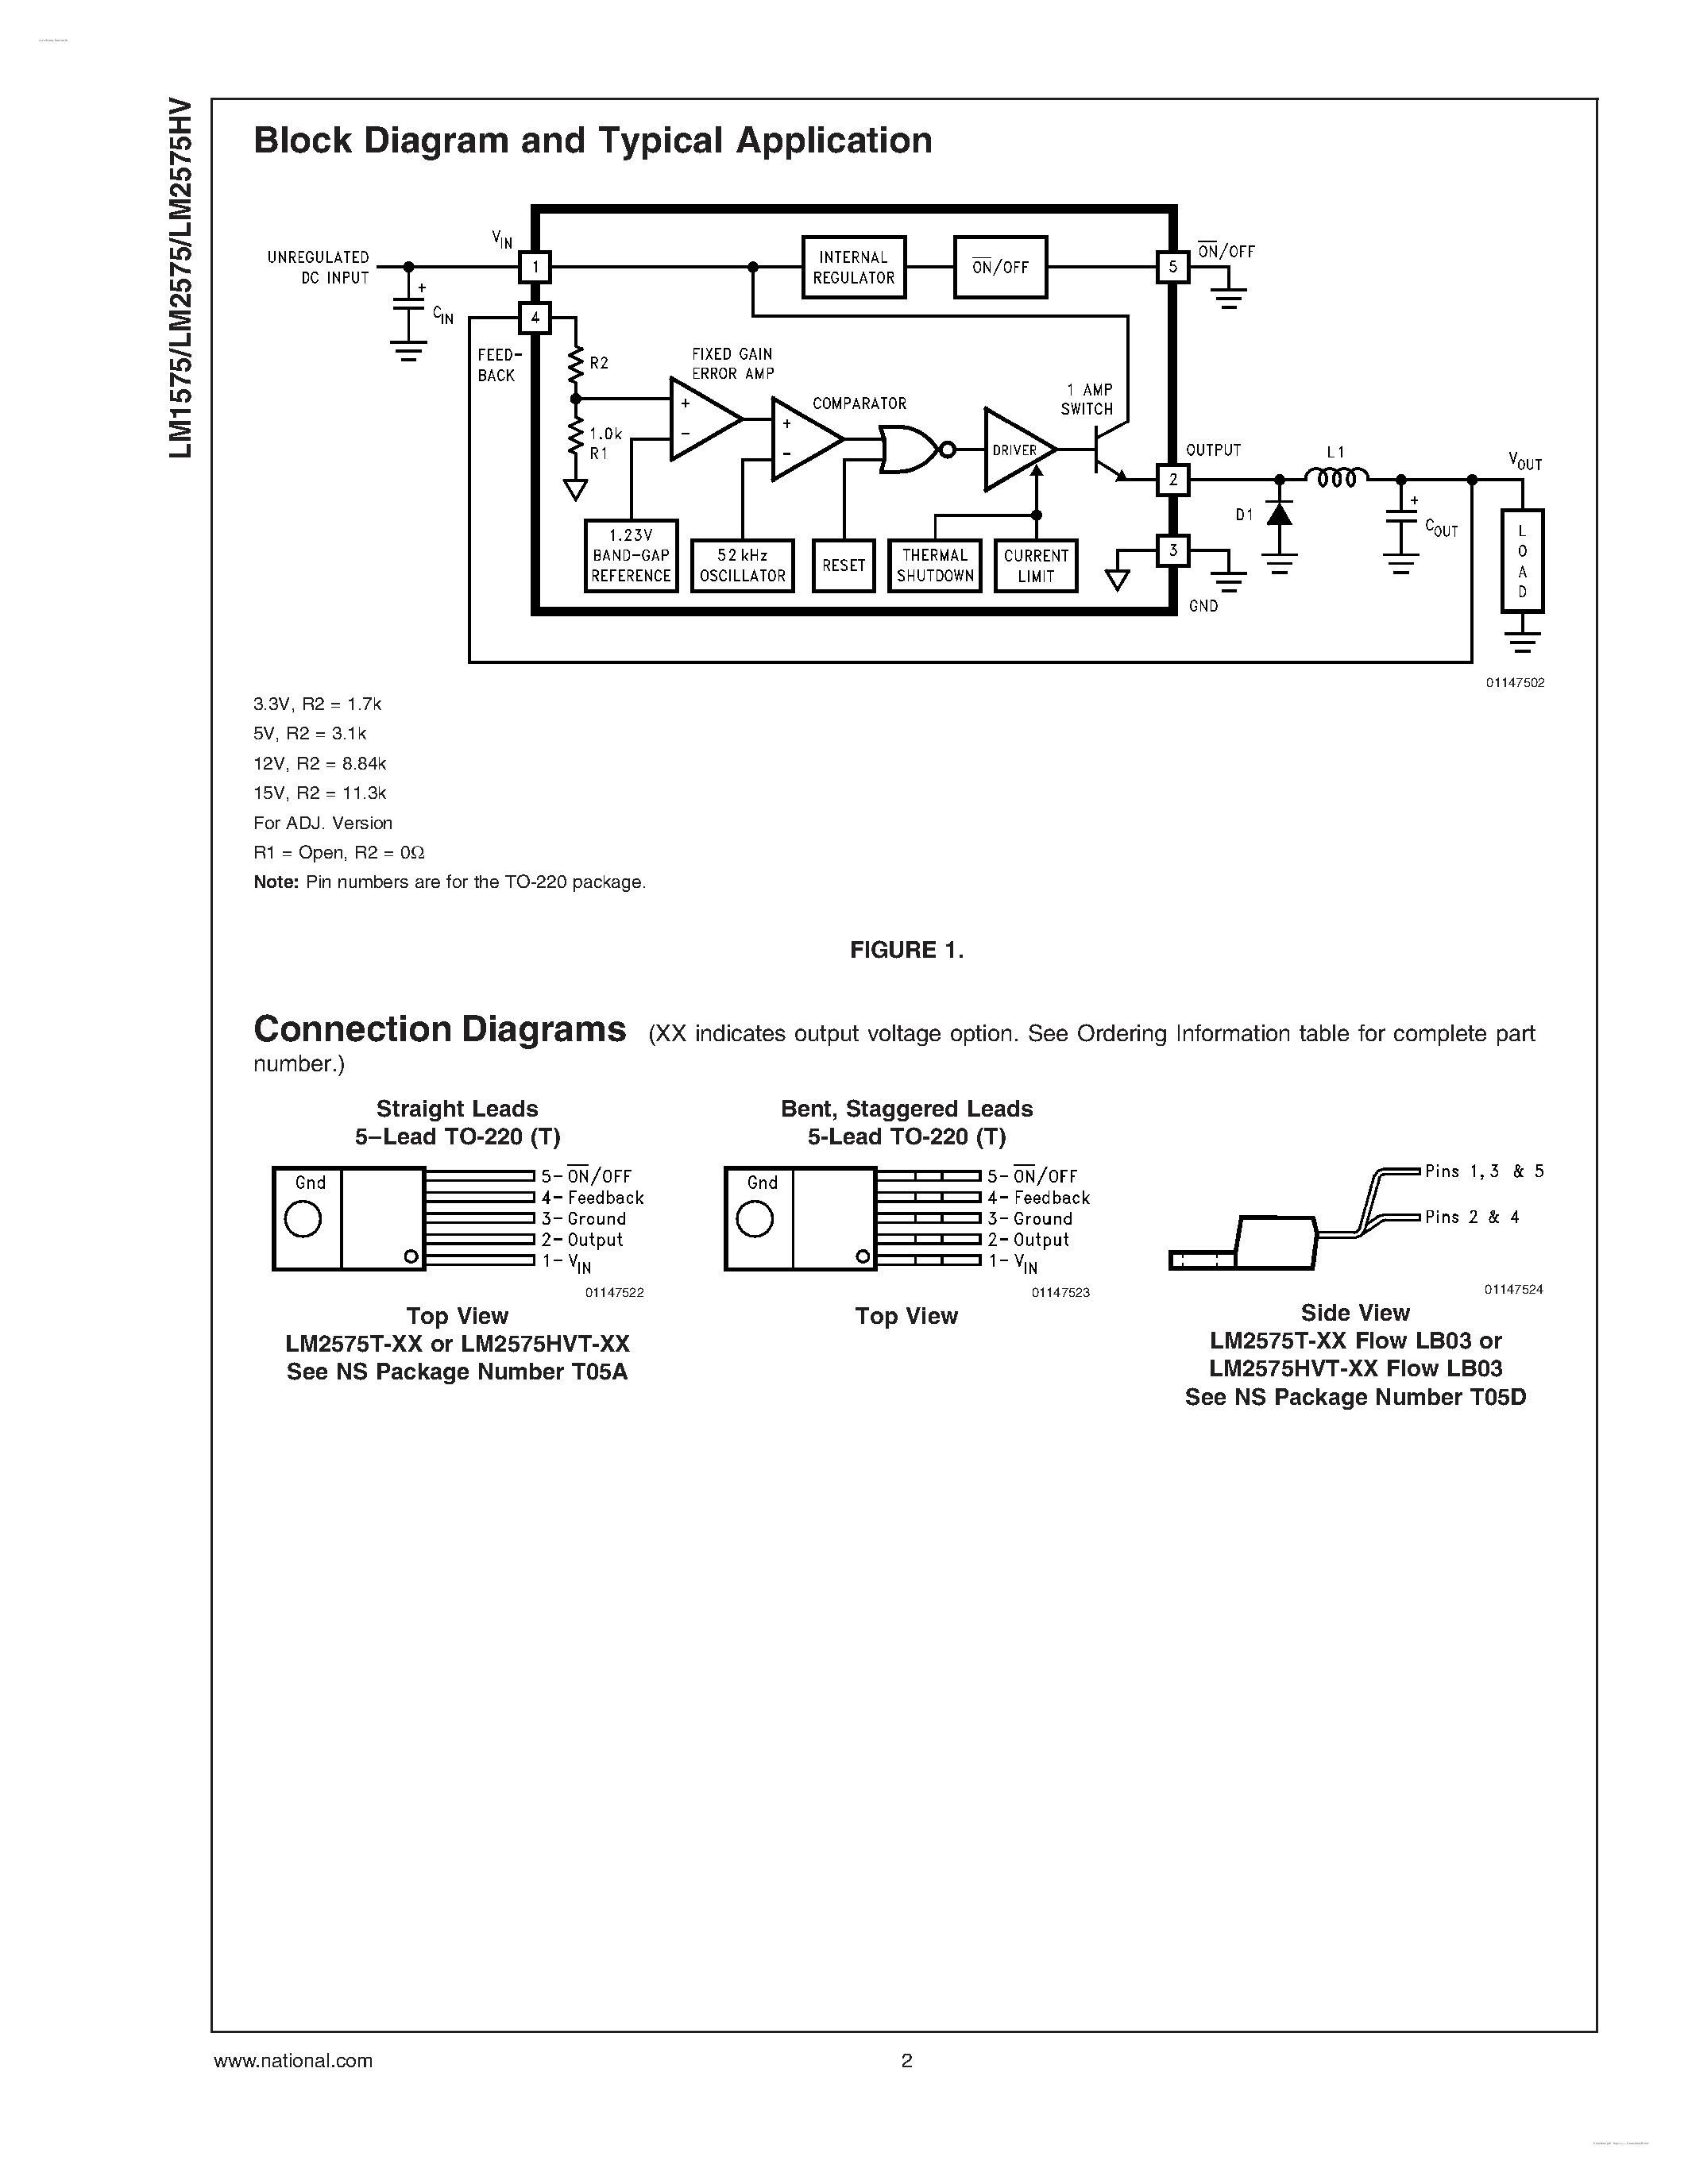 Datasheet 2575T-12 - Search -----> LM2575 page 2